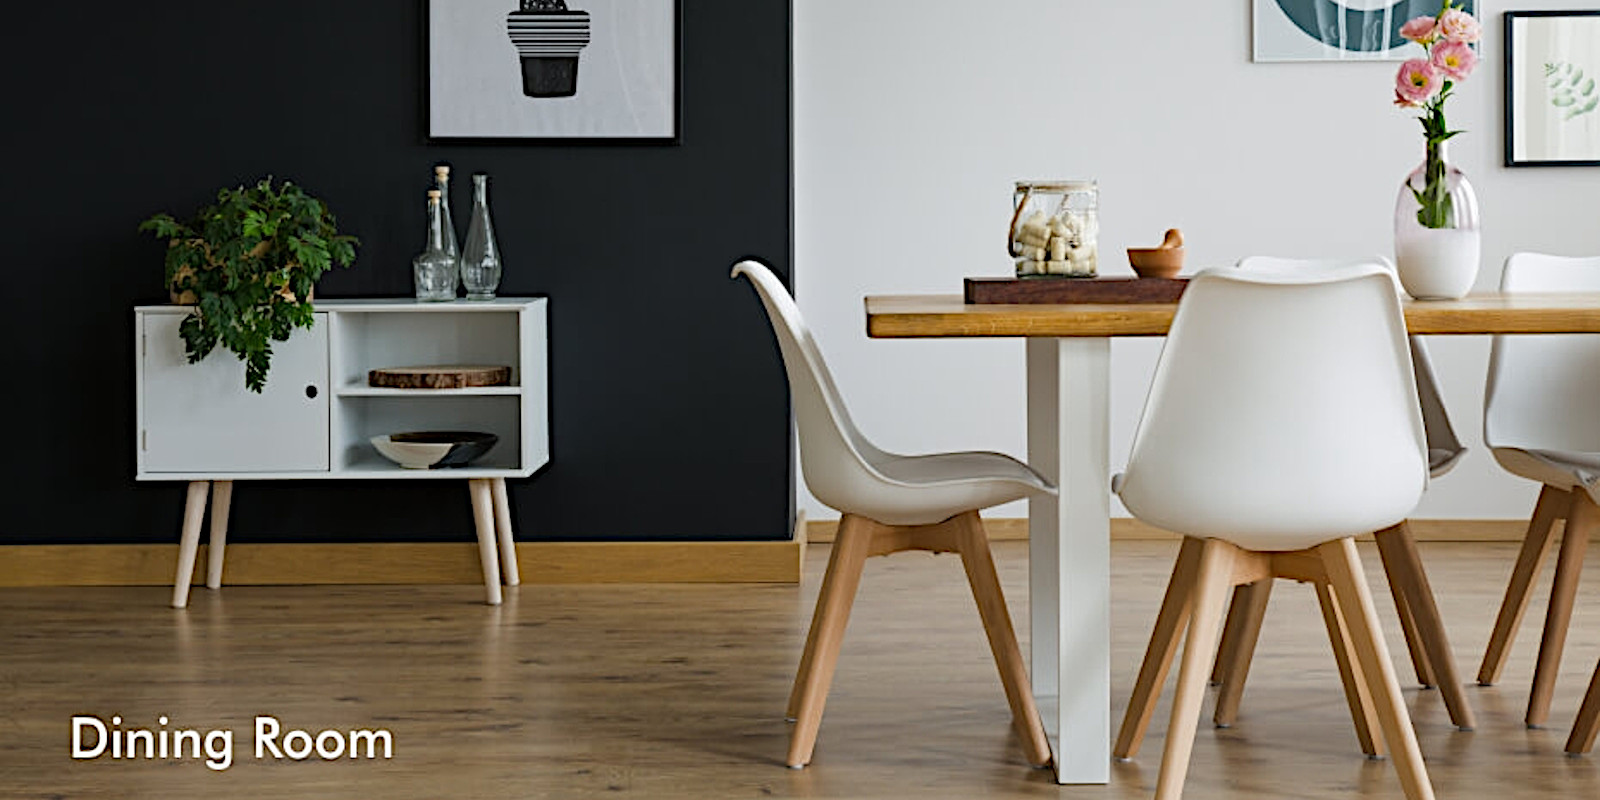 Dining room furniture reduced price